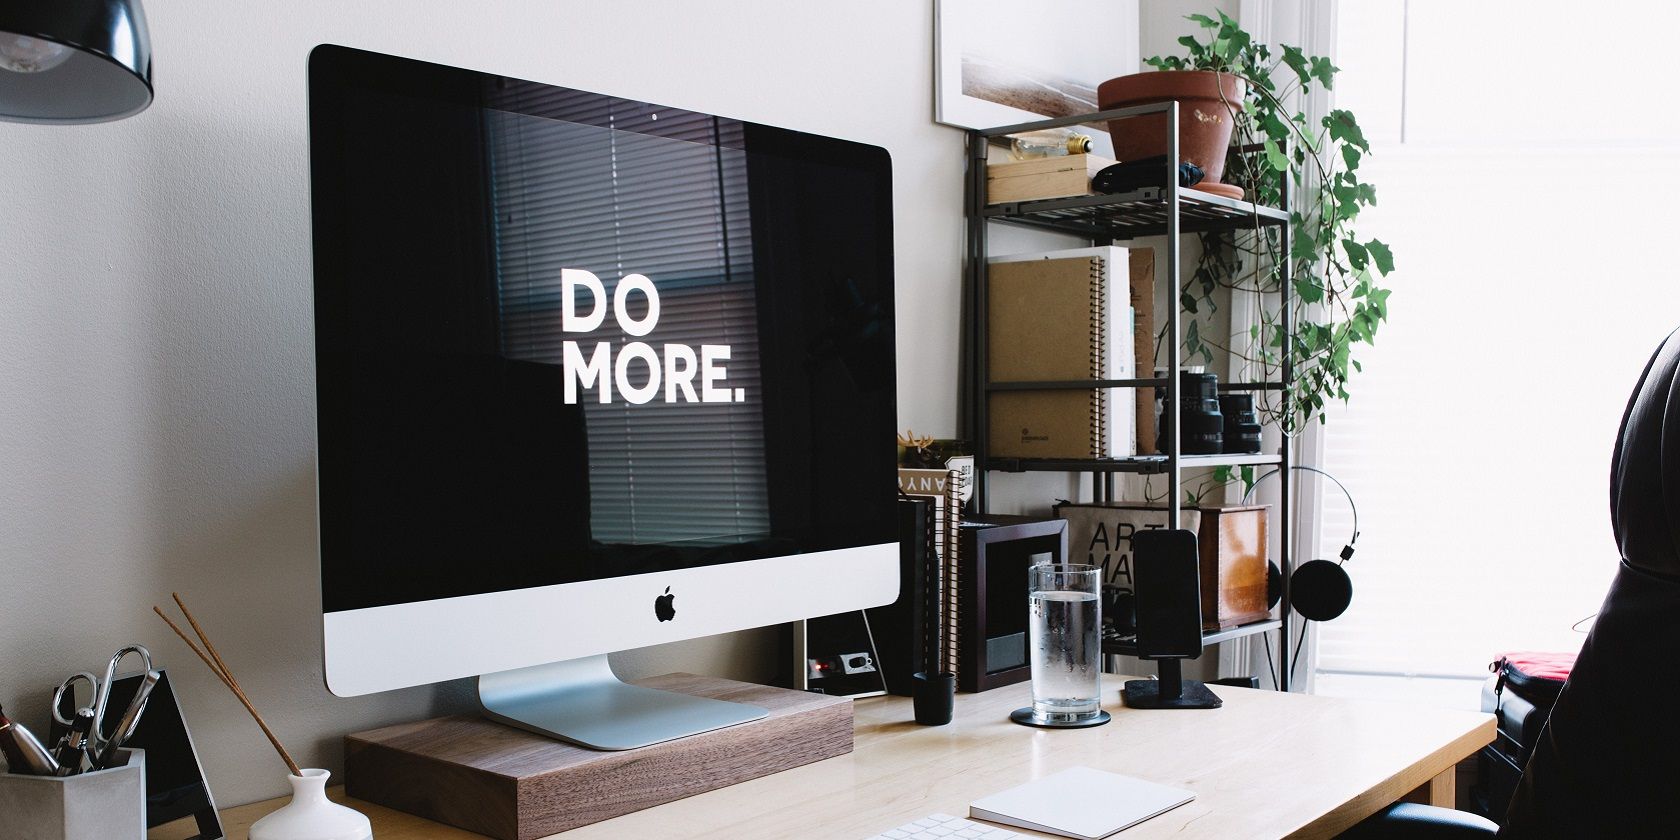 computer on a desk screen says Do More